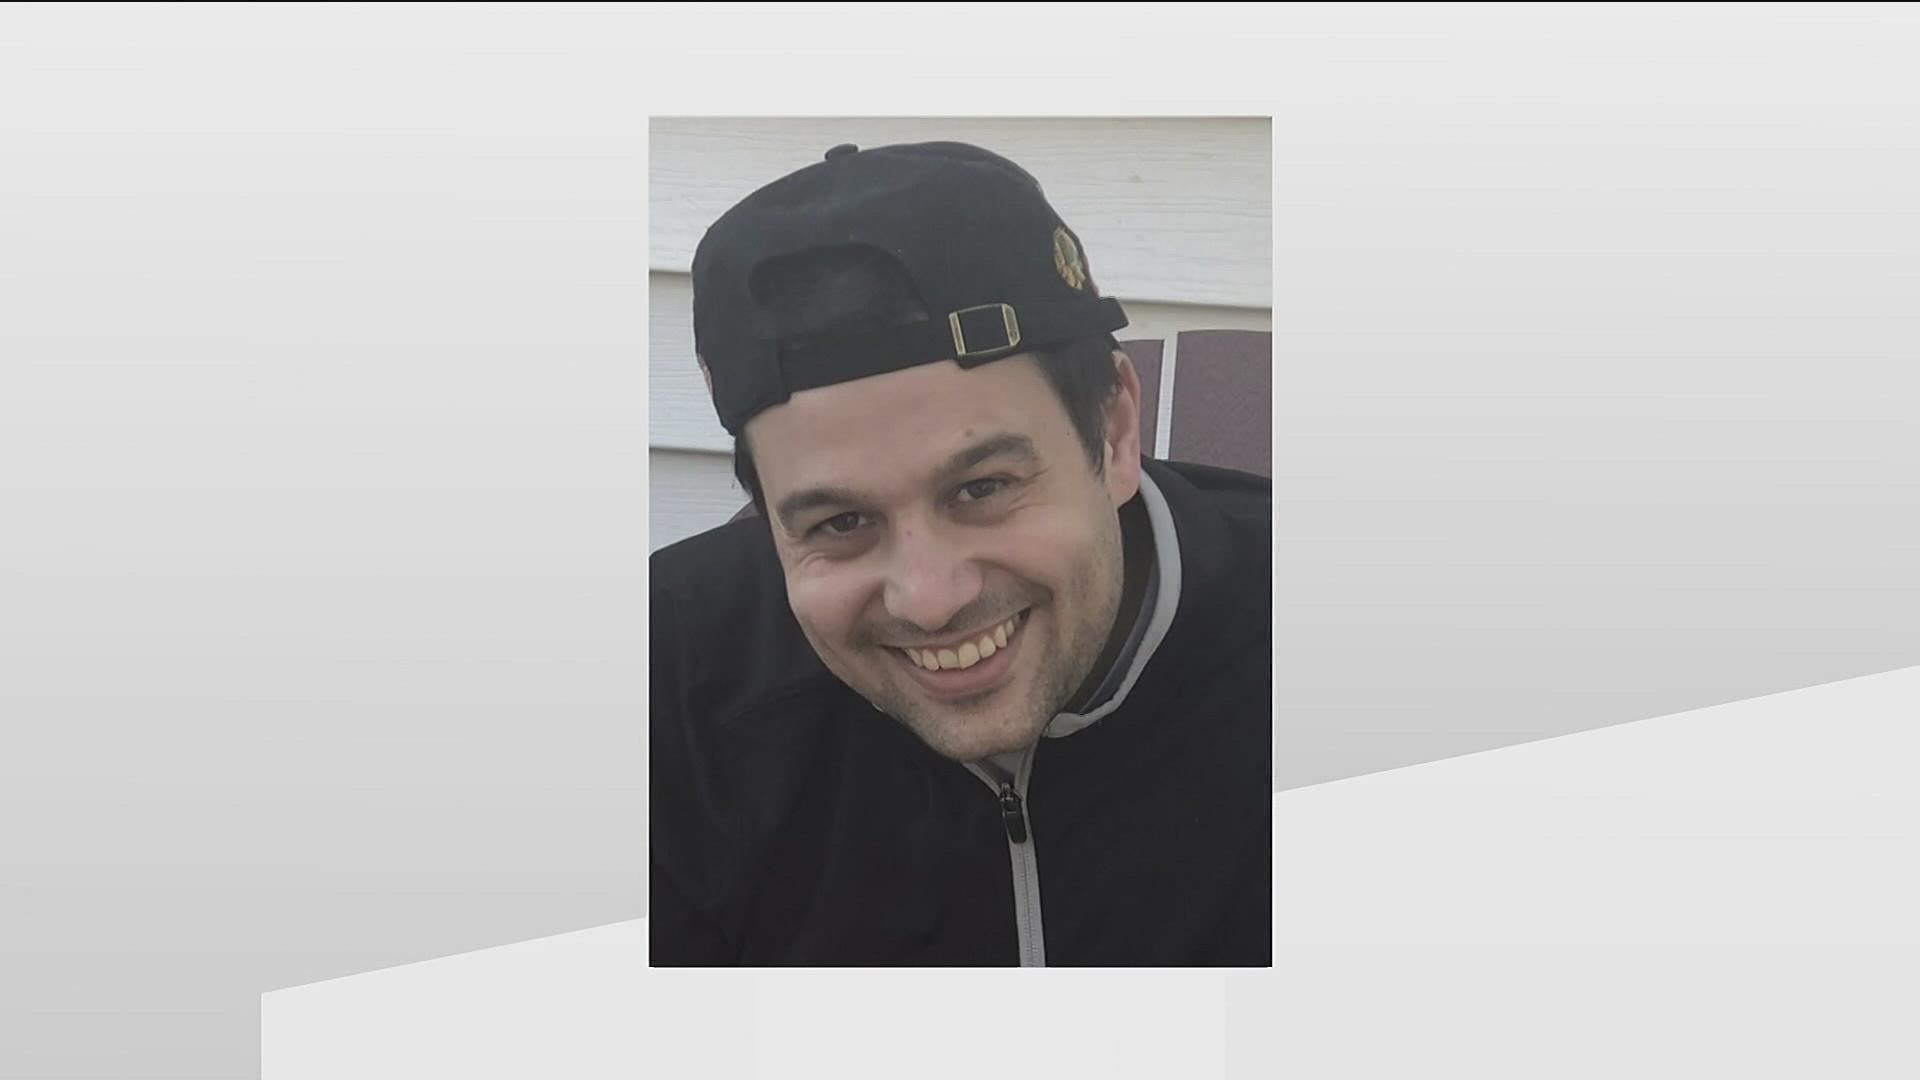 Nicholas Bachhuber was last seen leaving his home to get an emissions test on his car on Sunday.